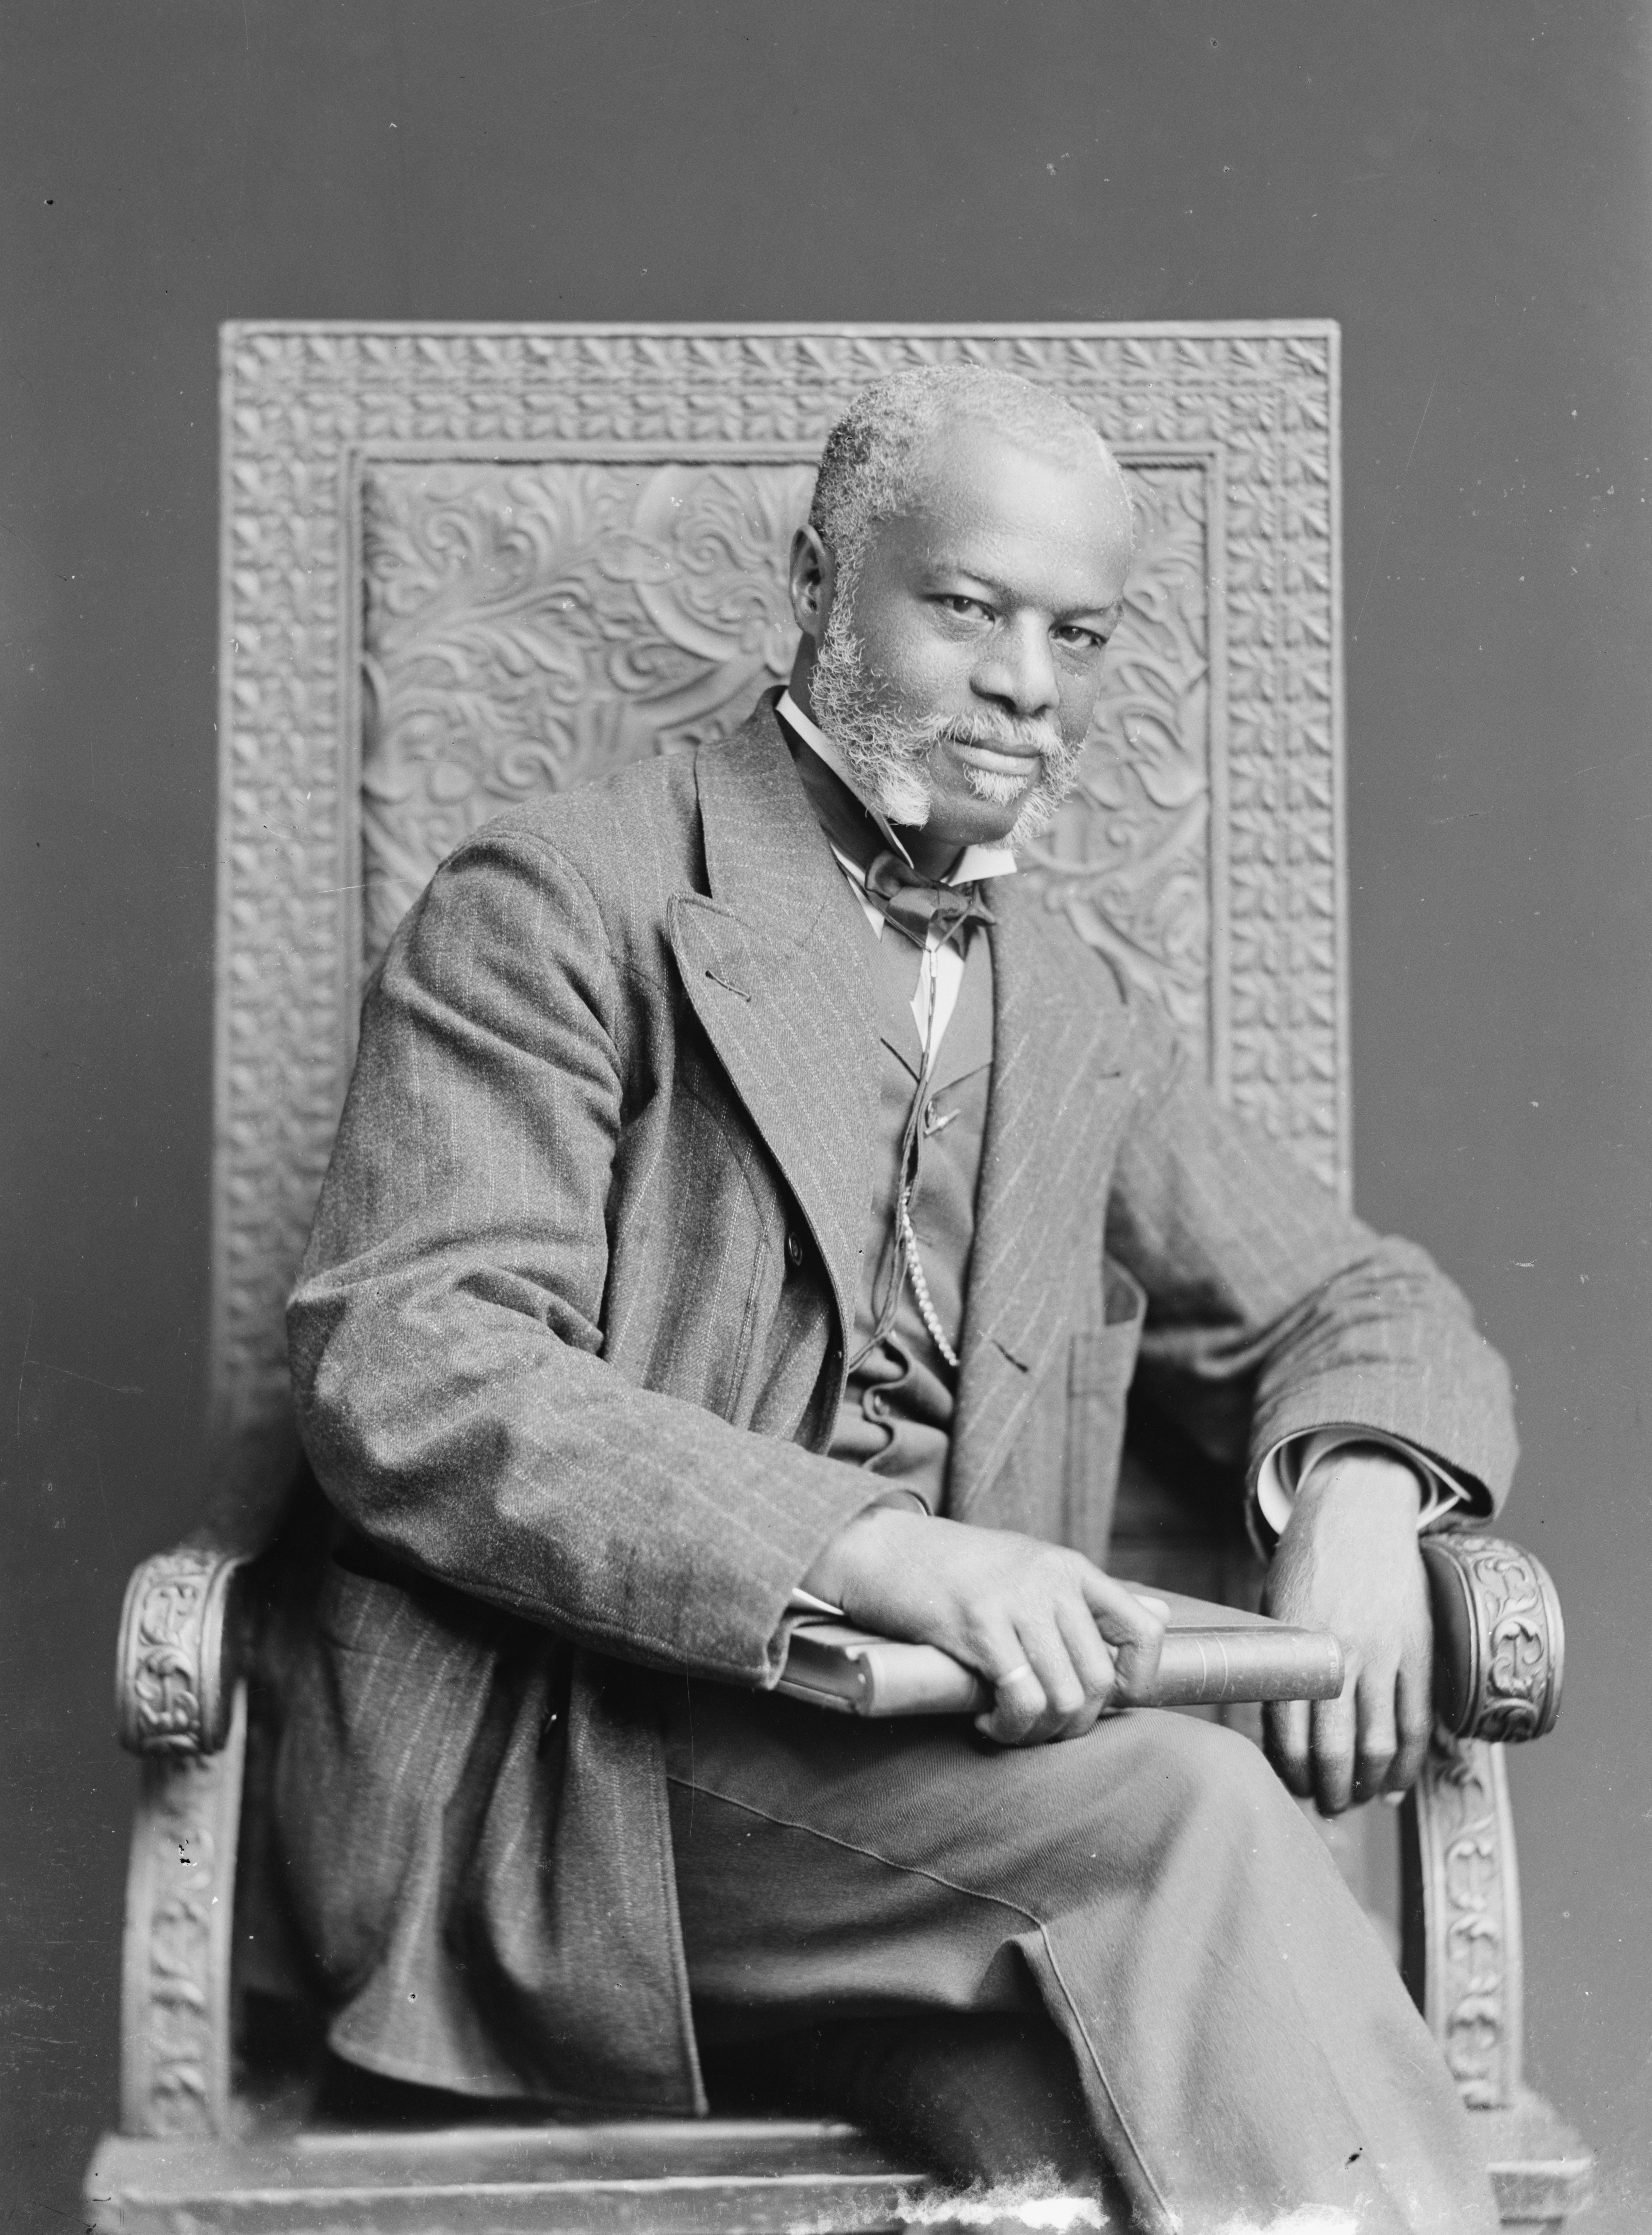 Bearded African American man holding a book, sitting in a decorative chair for a portrait. 